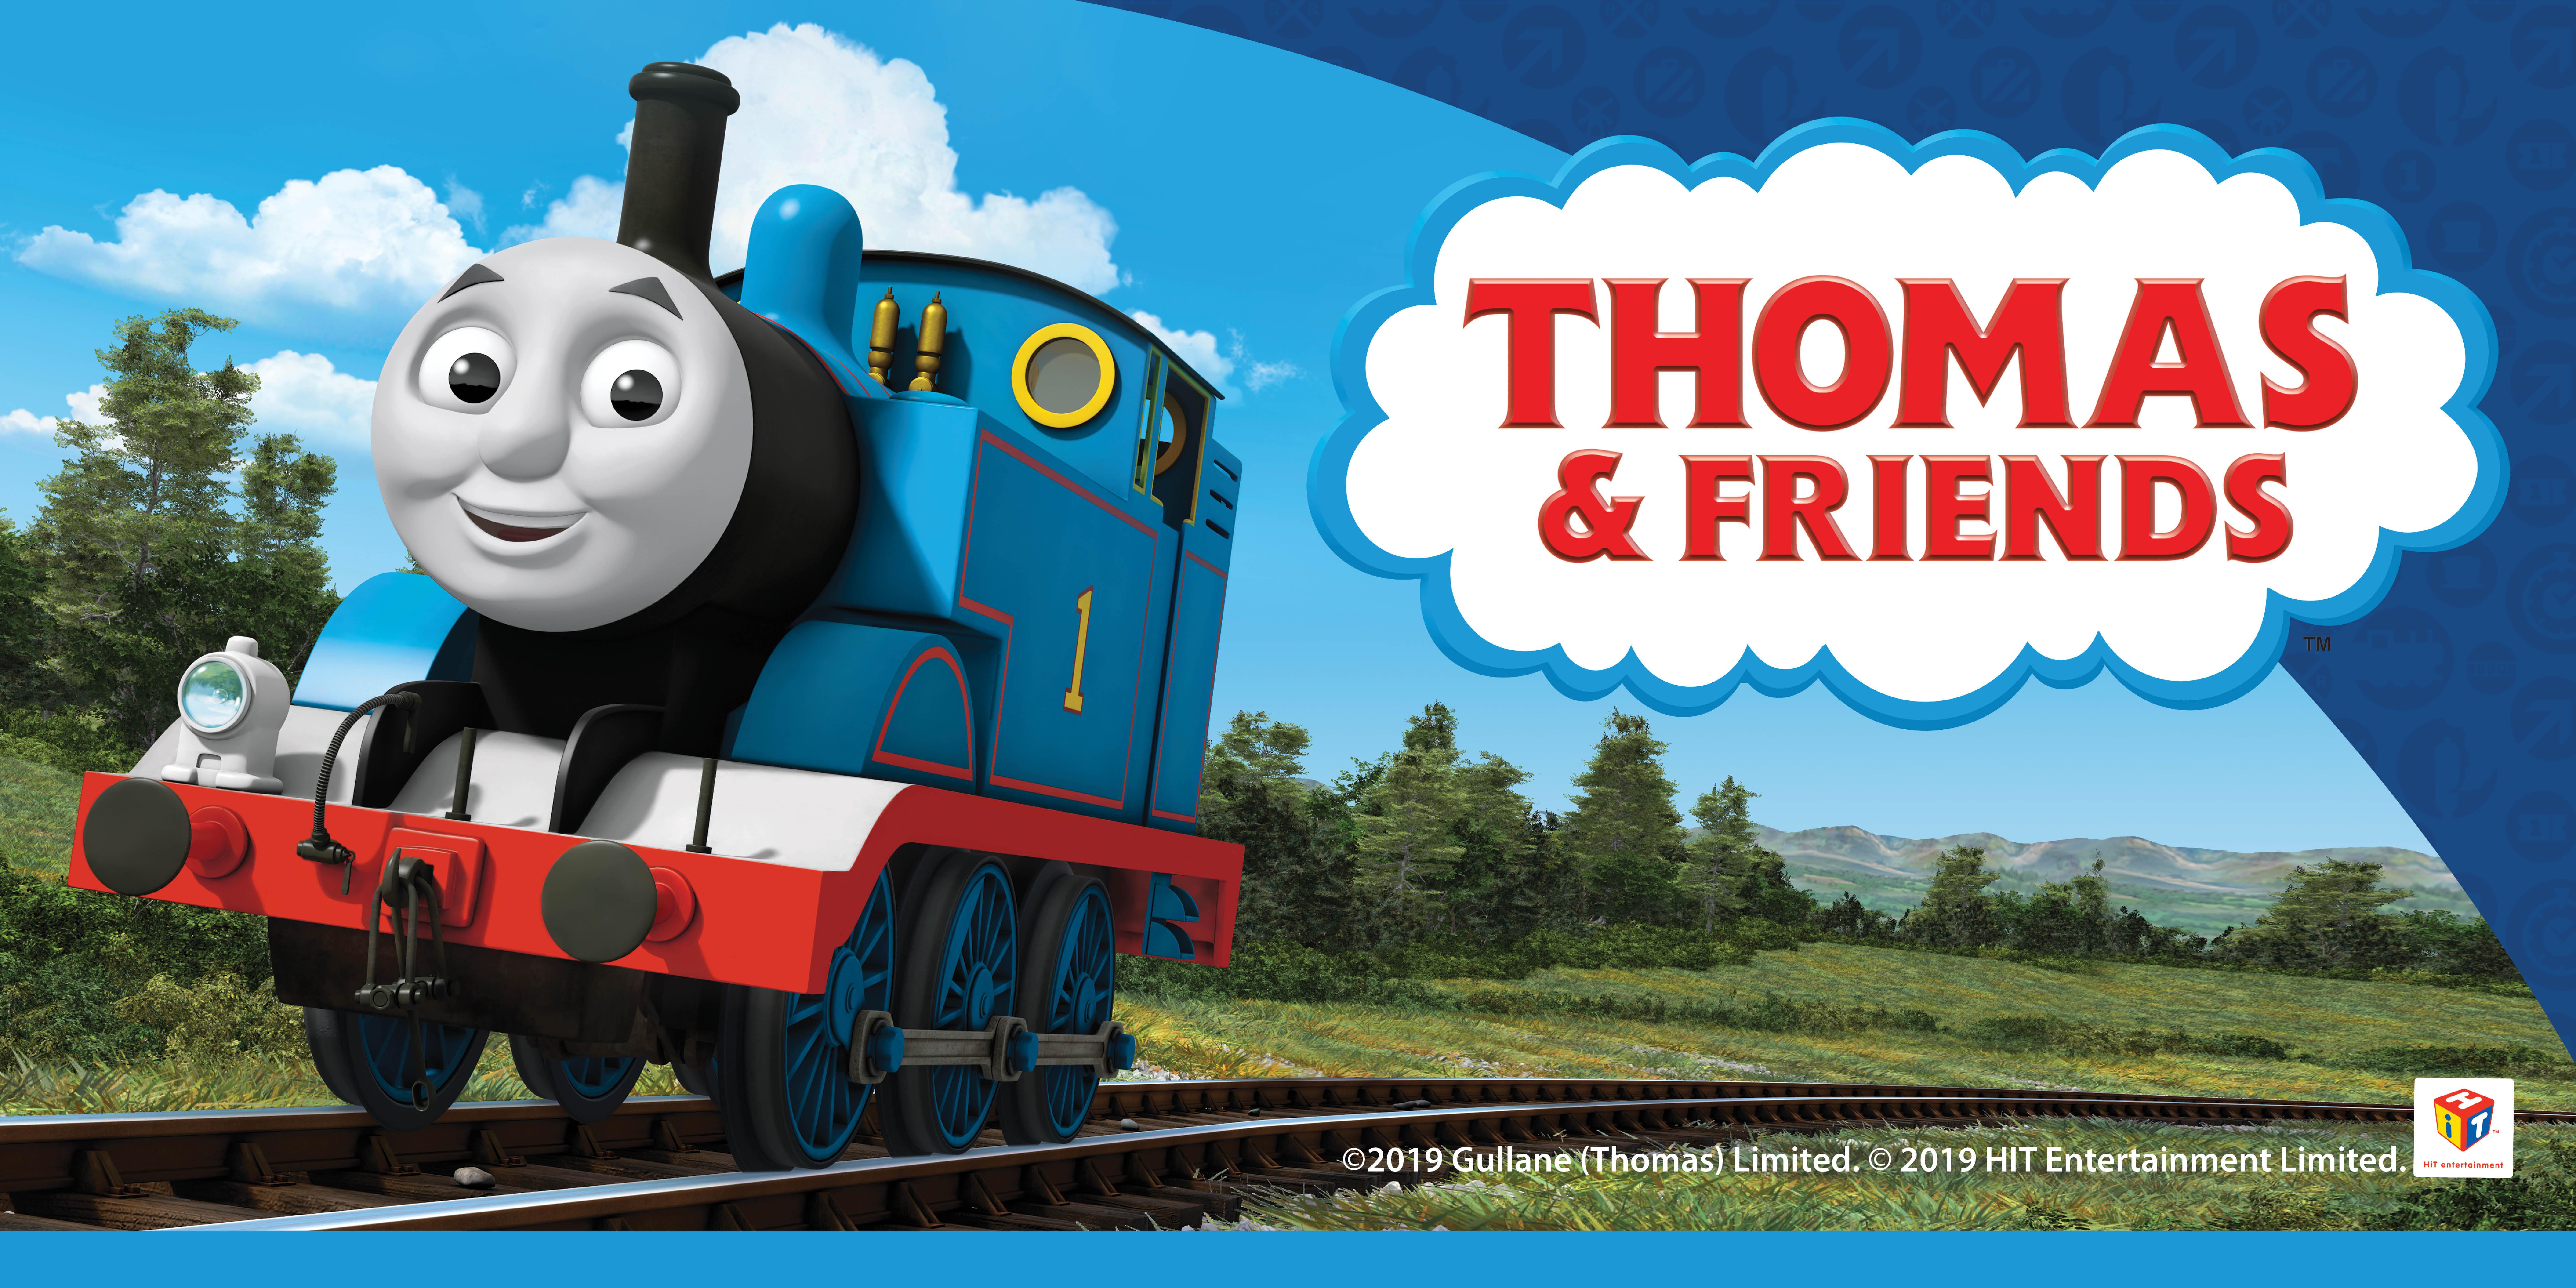 THOMAS & FRIENDS LIVE ON STAGE